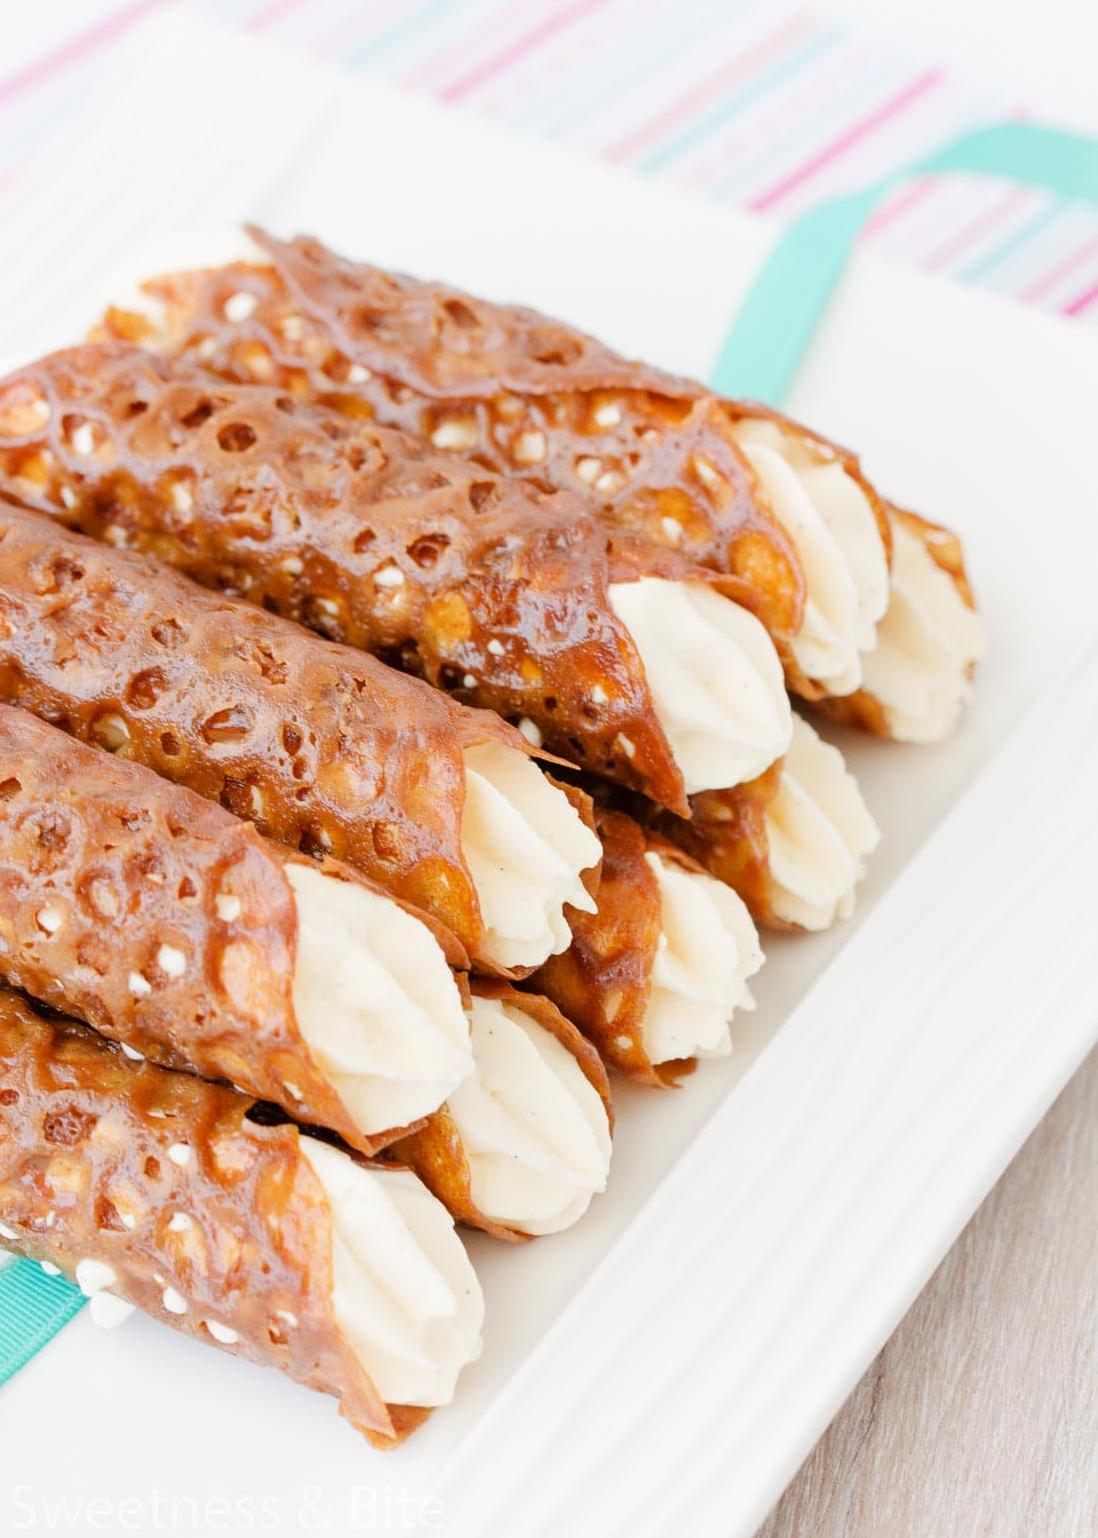  Brandy snaps are a classic dessert and now you can enjoy them gluten-free.